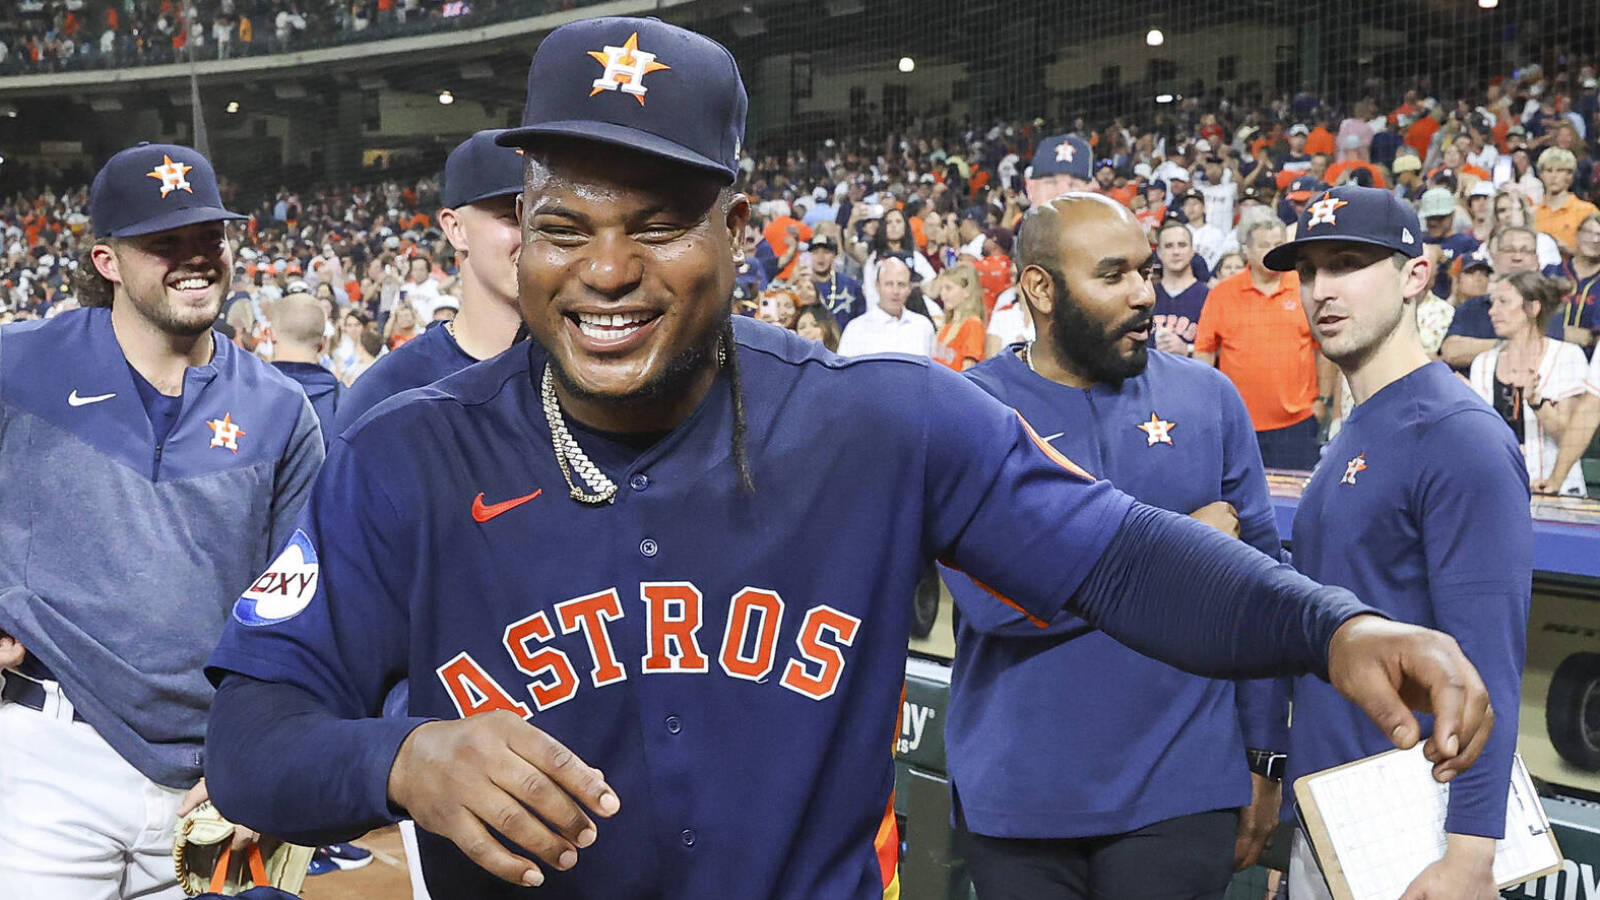 Framber Valdez caps off great day for Astros with no-hitter